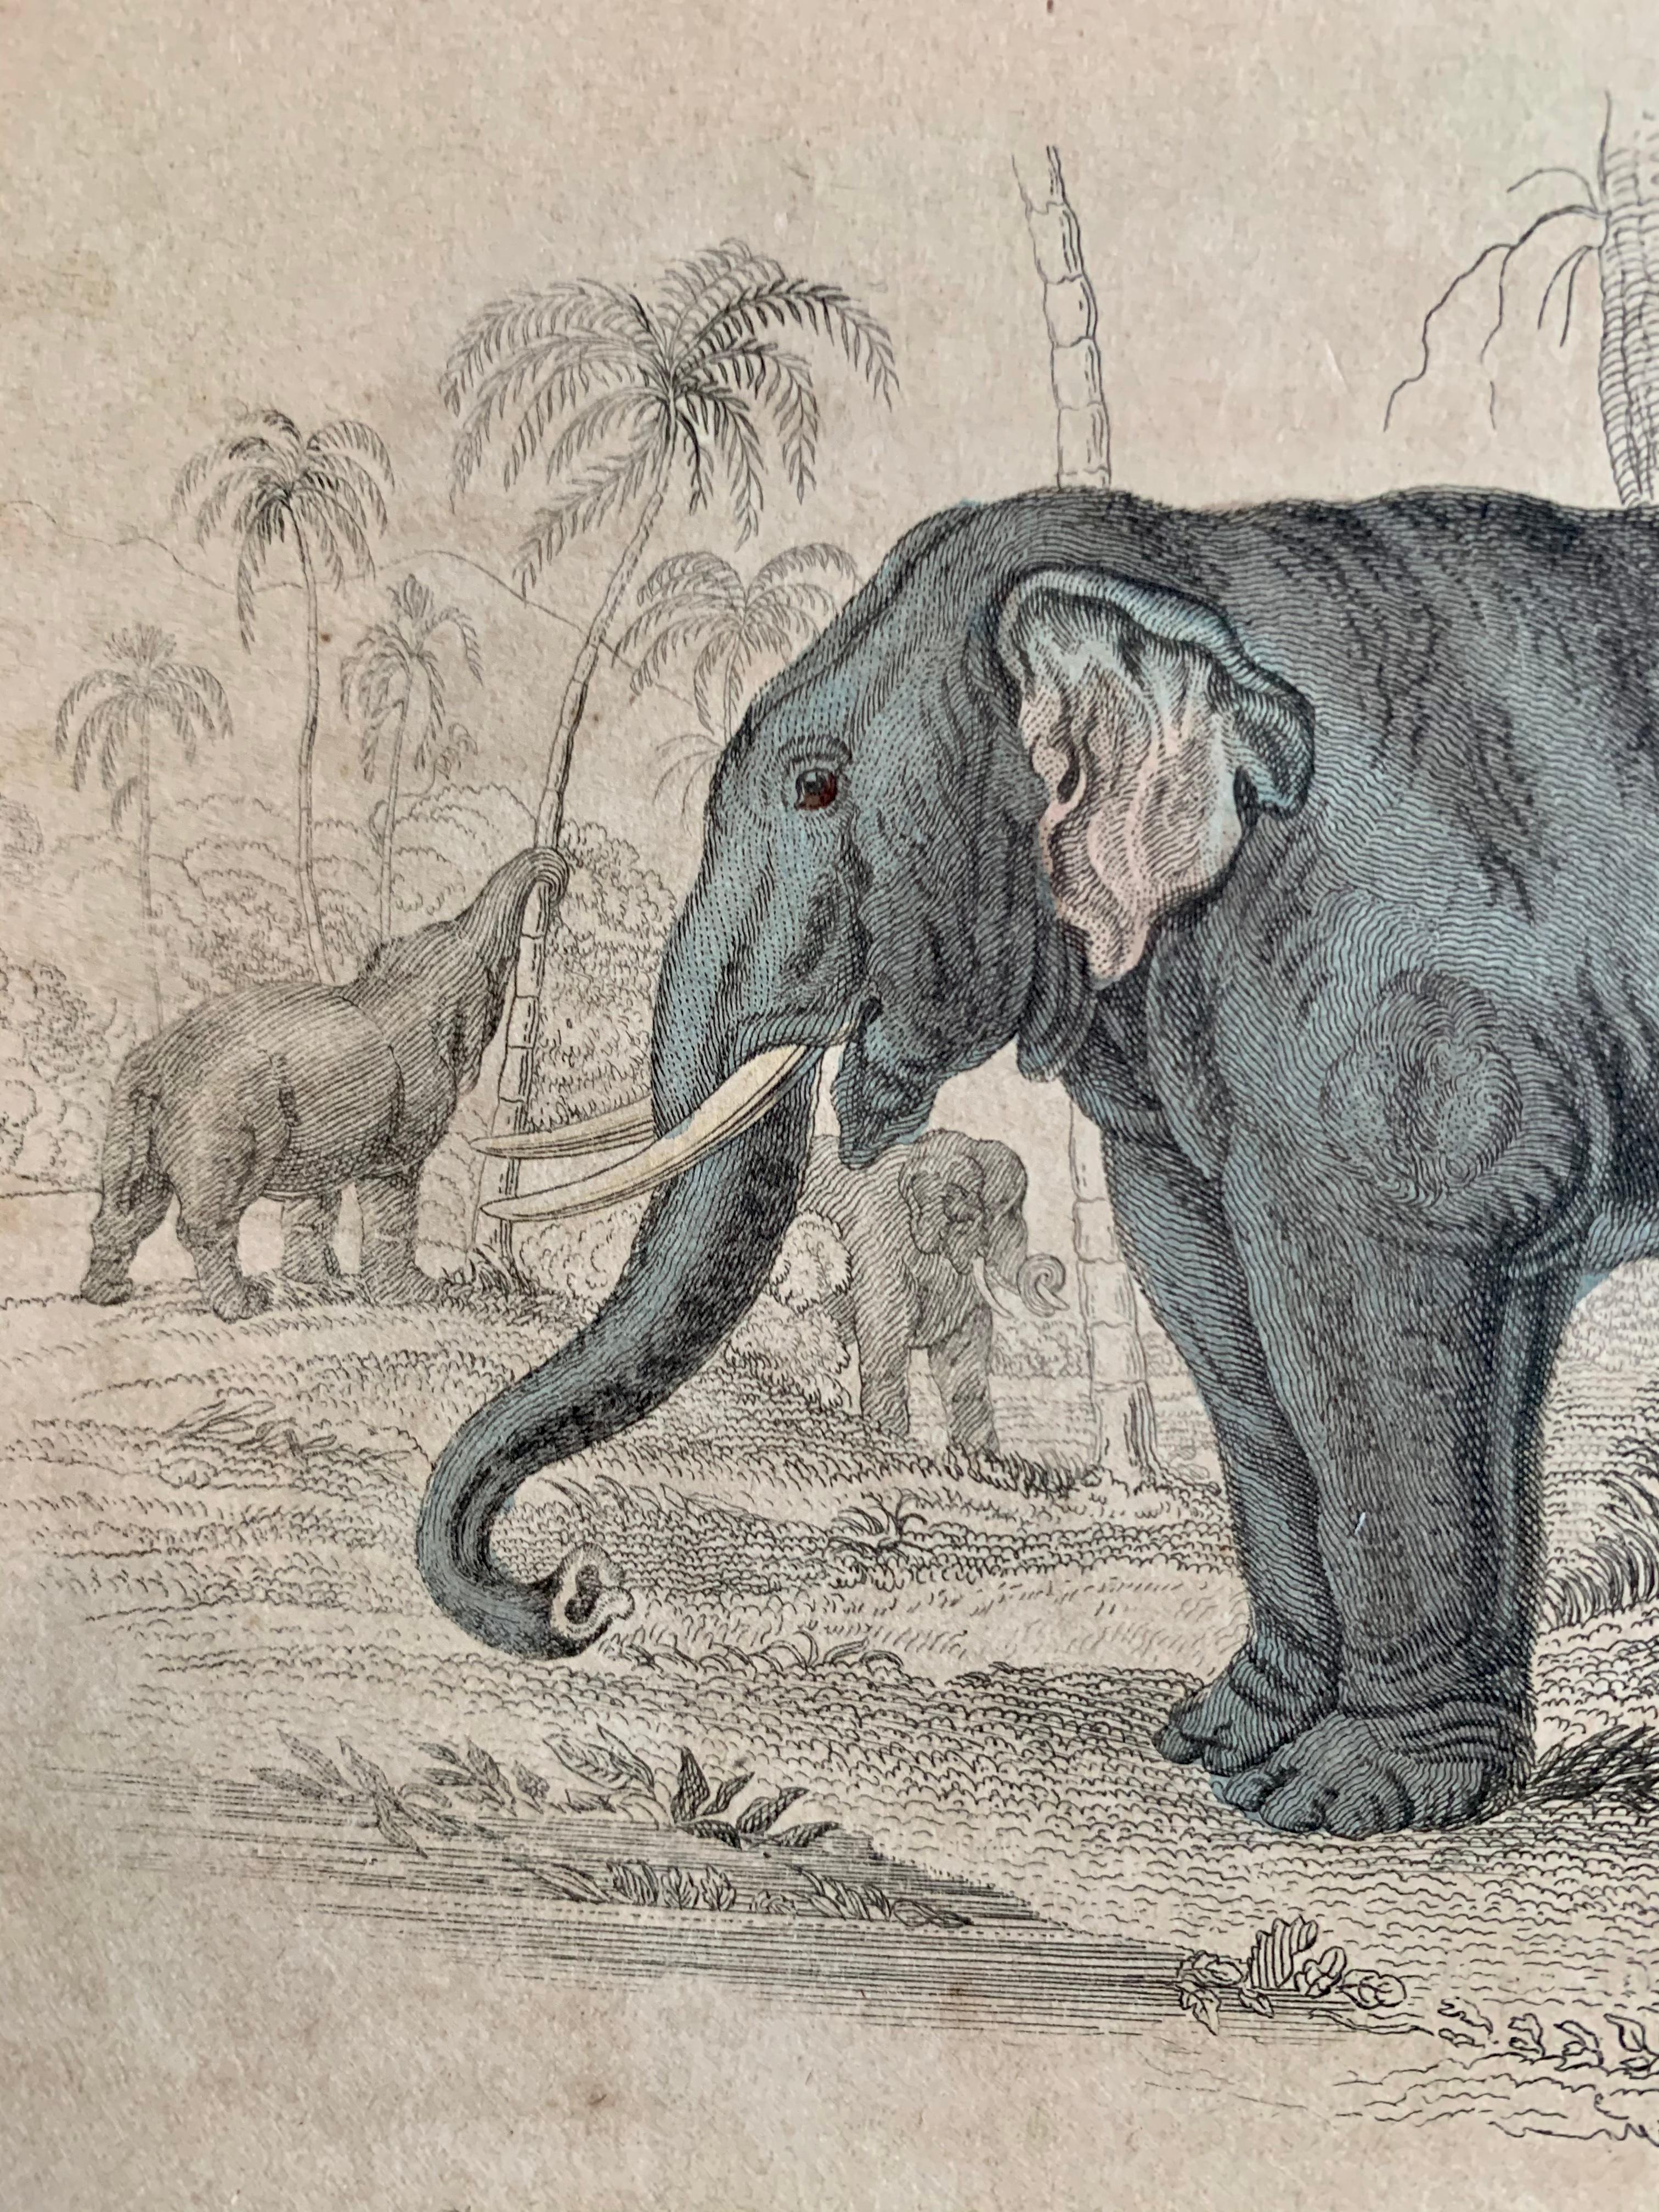 Hand colored print depicting Elephants in the Indian jungle published in 1840 based on the work of Scottish naturalist, Sir William Jardine, 7th Baronet.  

From 